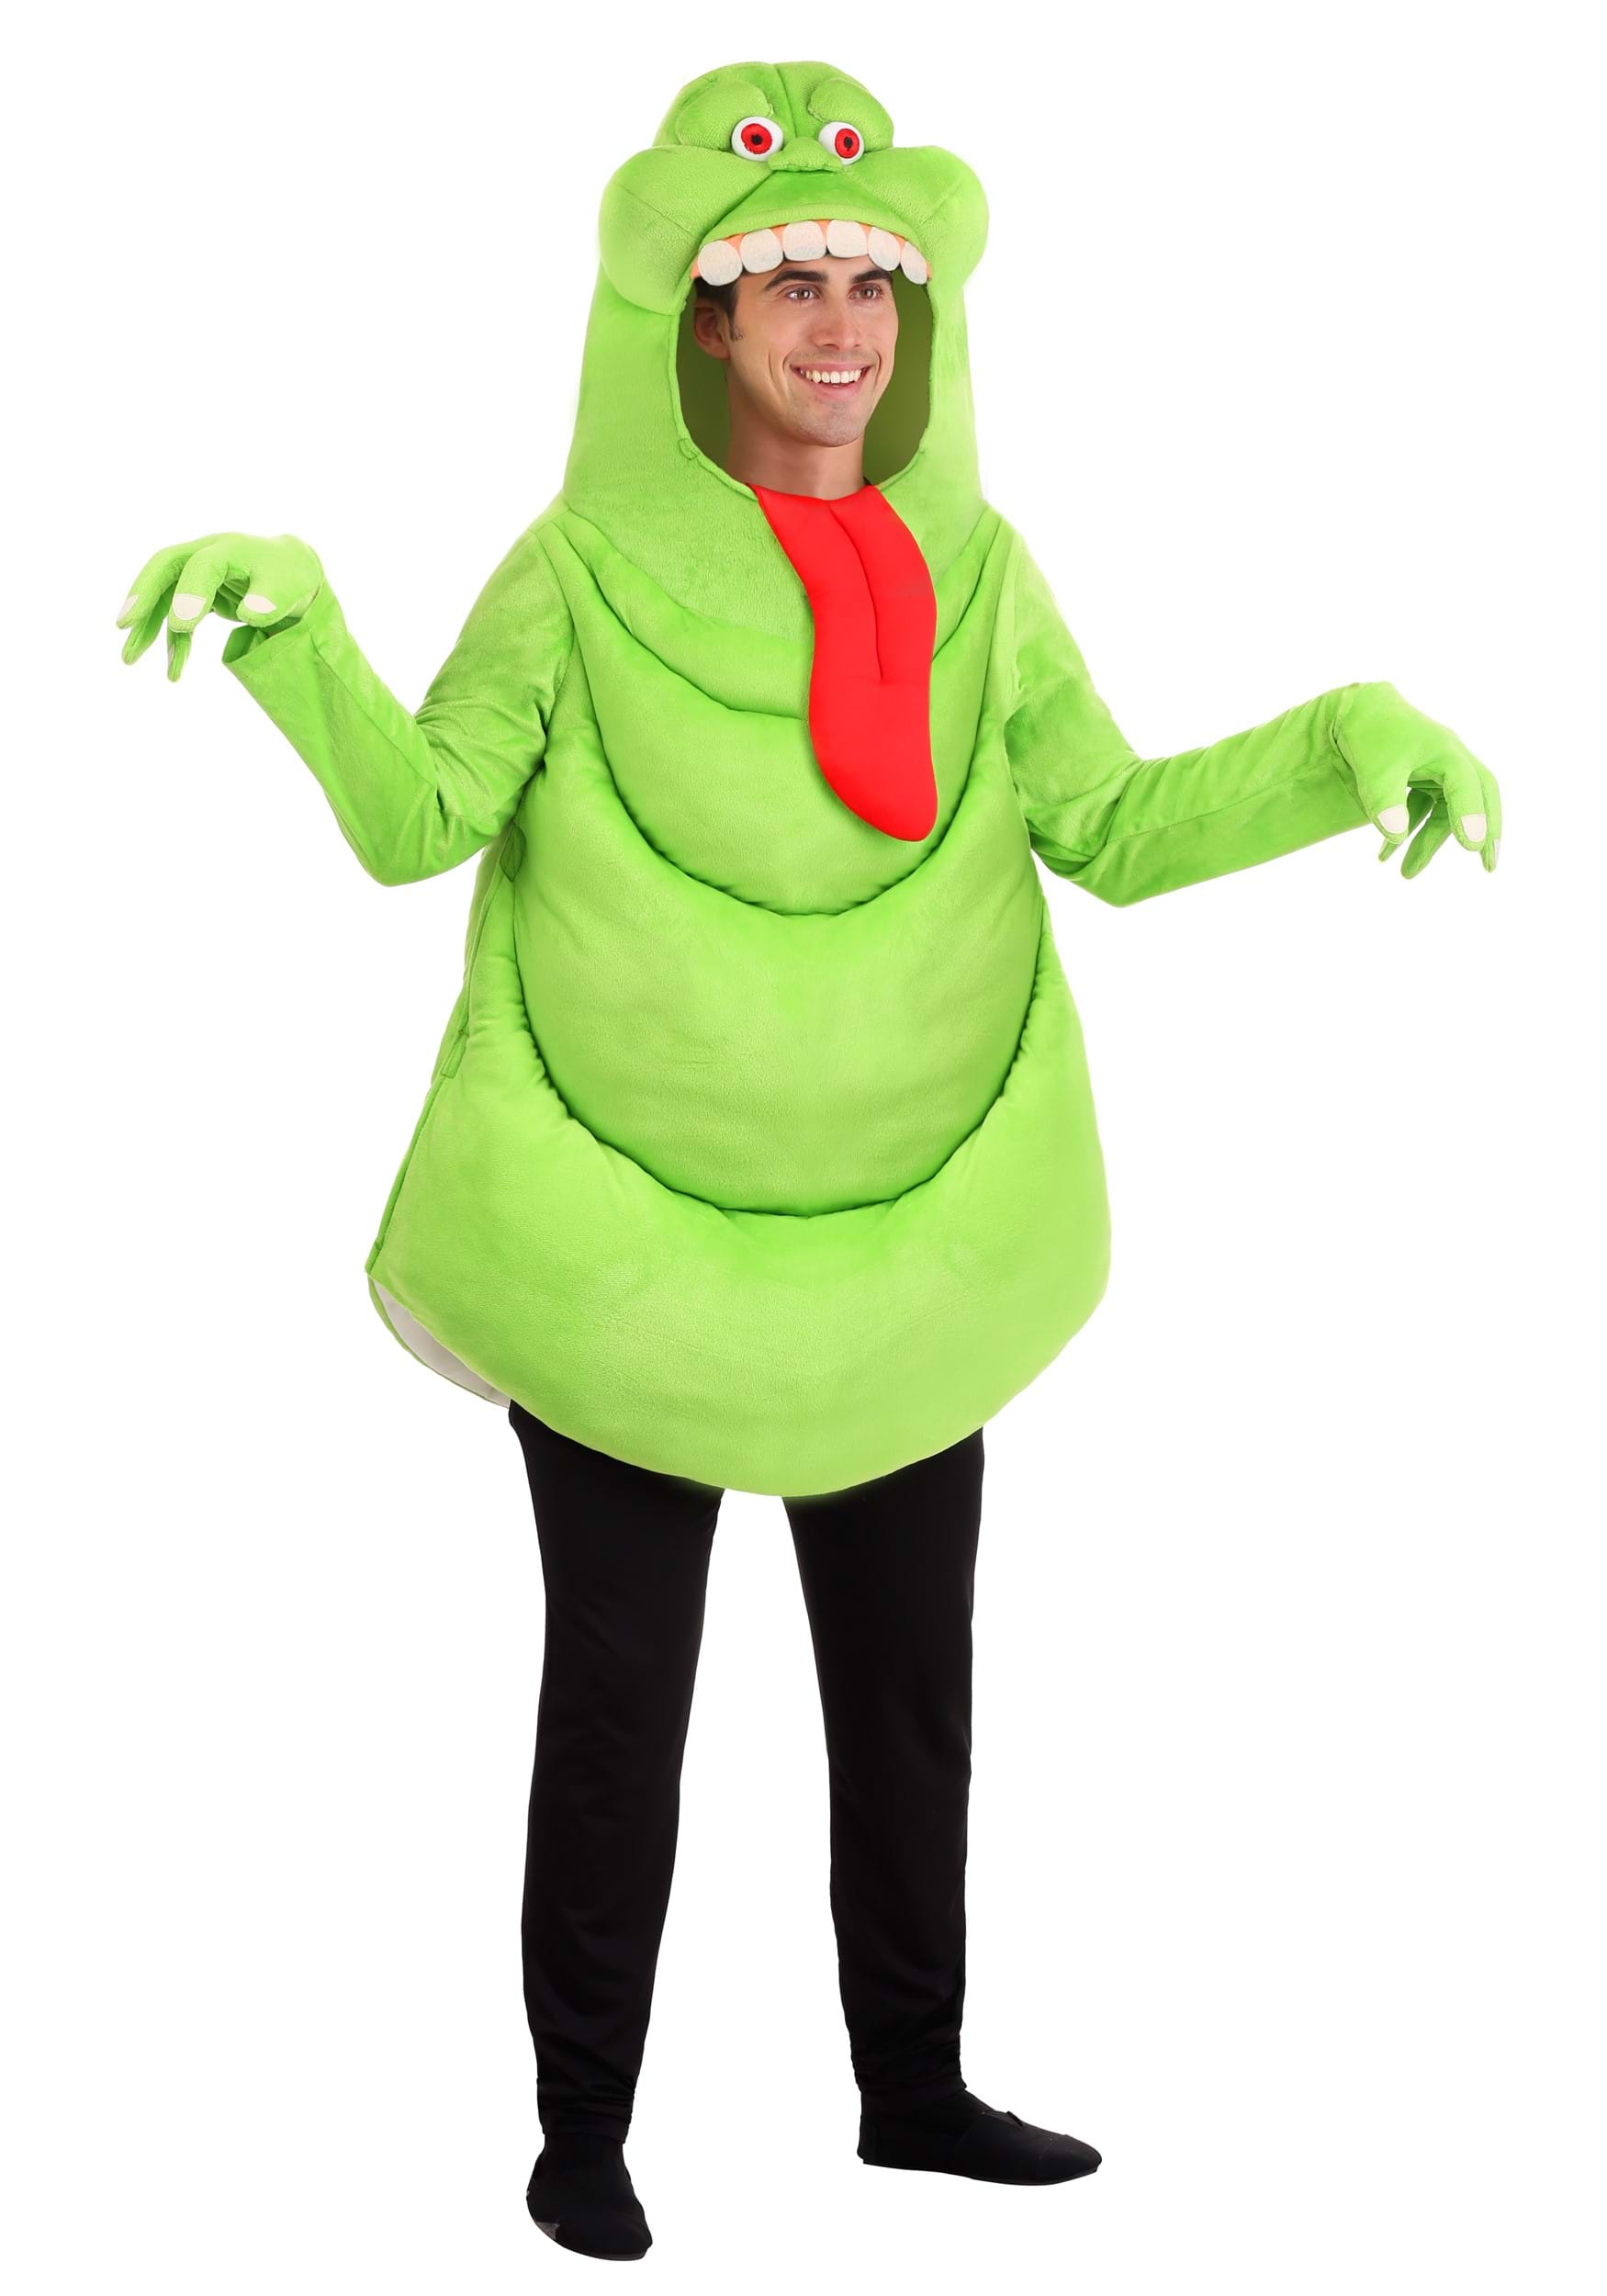 Photos - Fancy Dress Ghostbusters FUN Costumes  Adult Plus Size Slimer Costume Green/Red FUN 